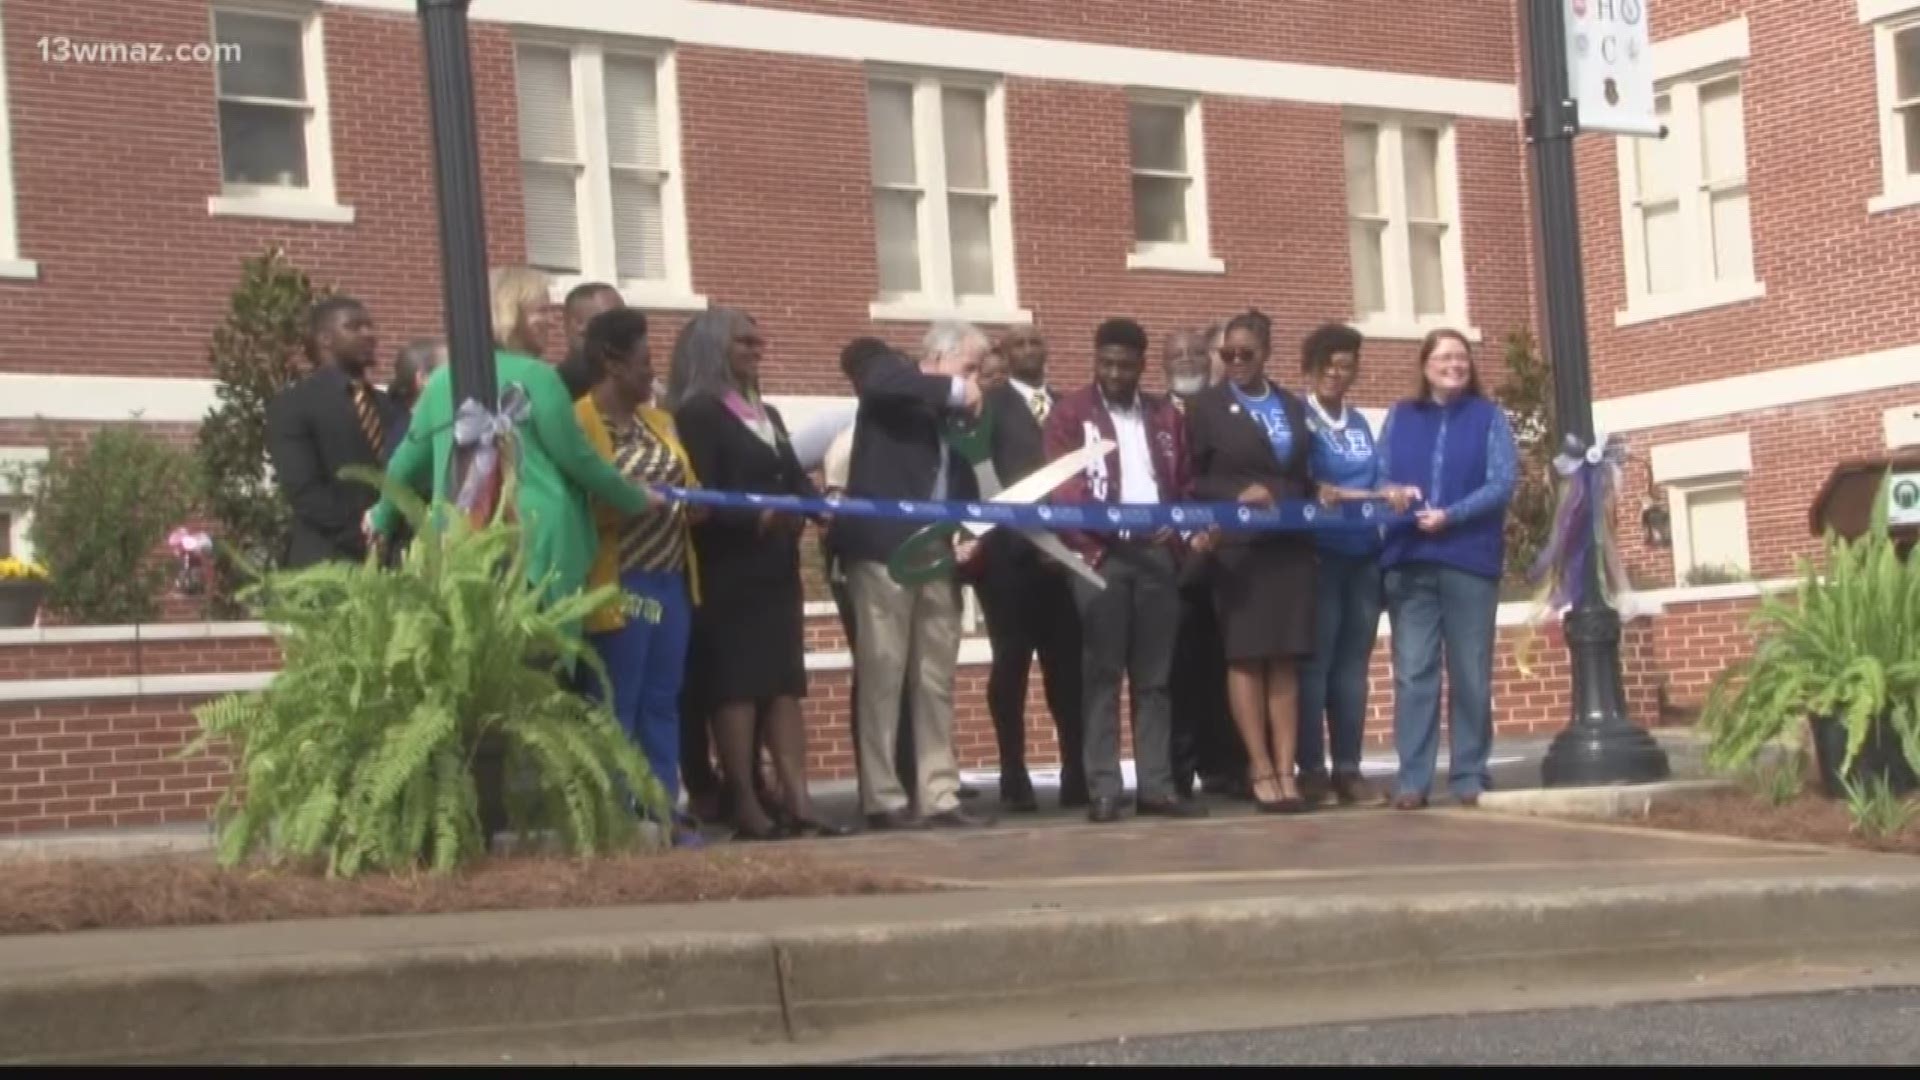 Members and alumni of Georgia College's National Panhellenic Council gathered outside of Bell Hall on Saturday for a special dedication ceremony.